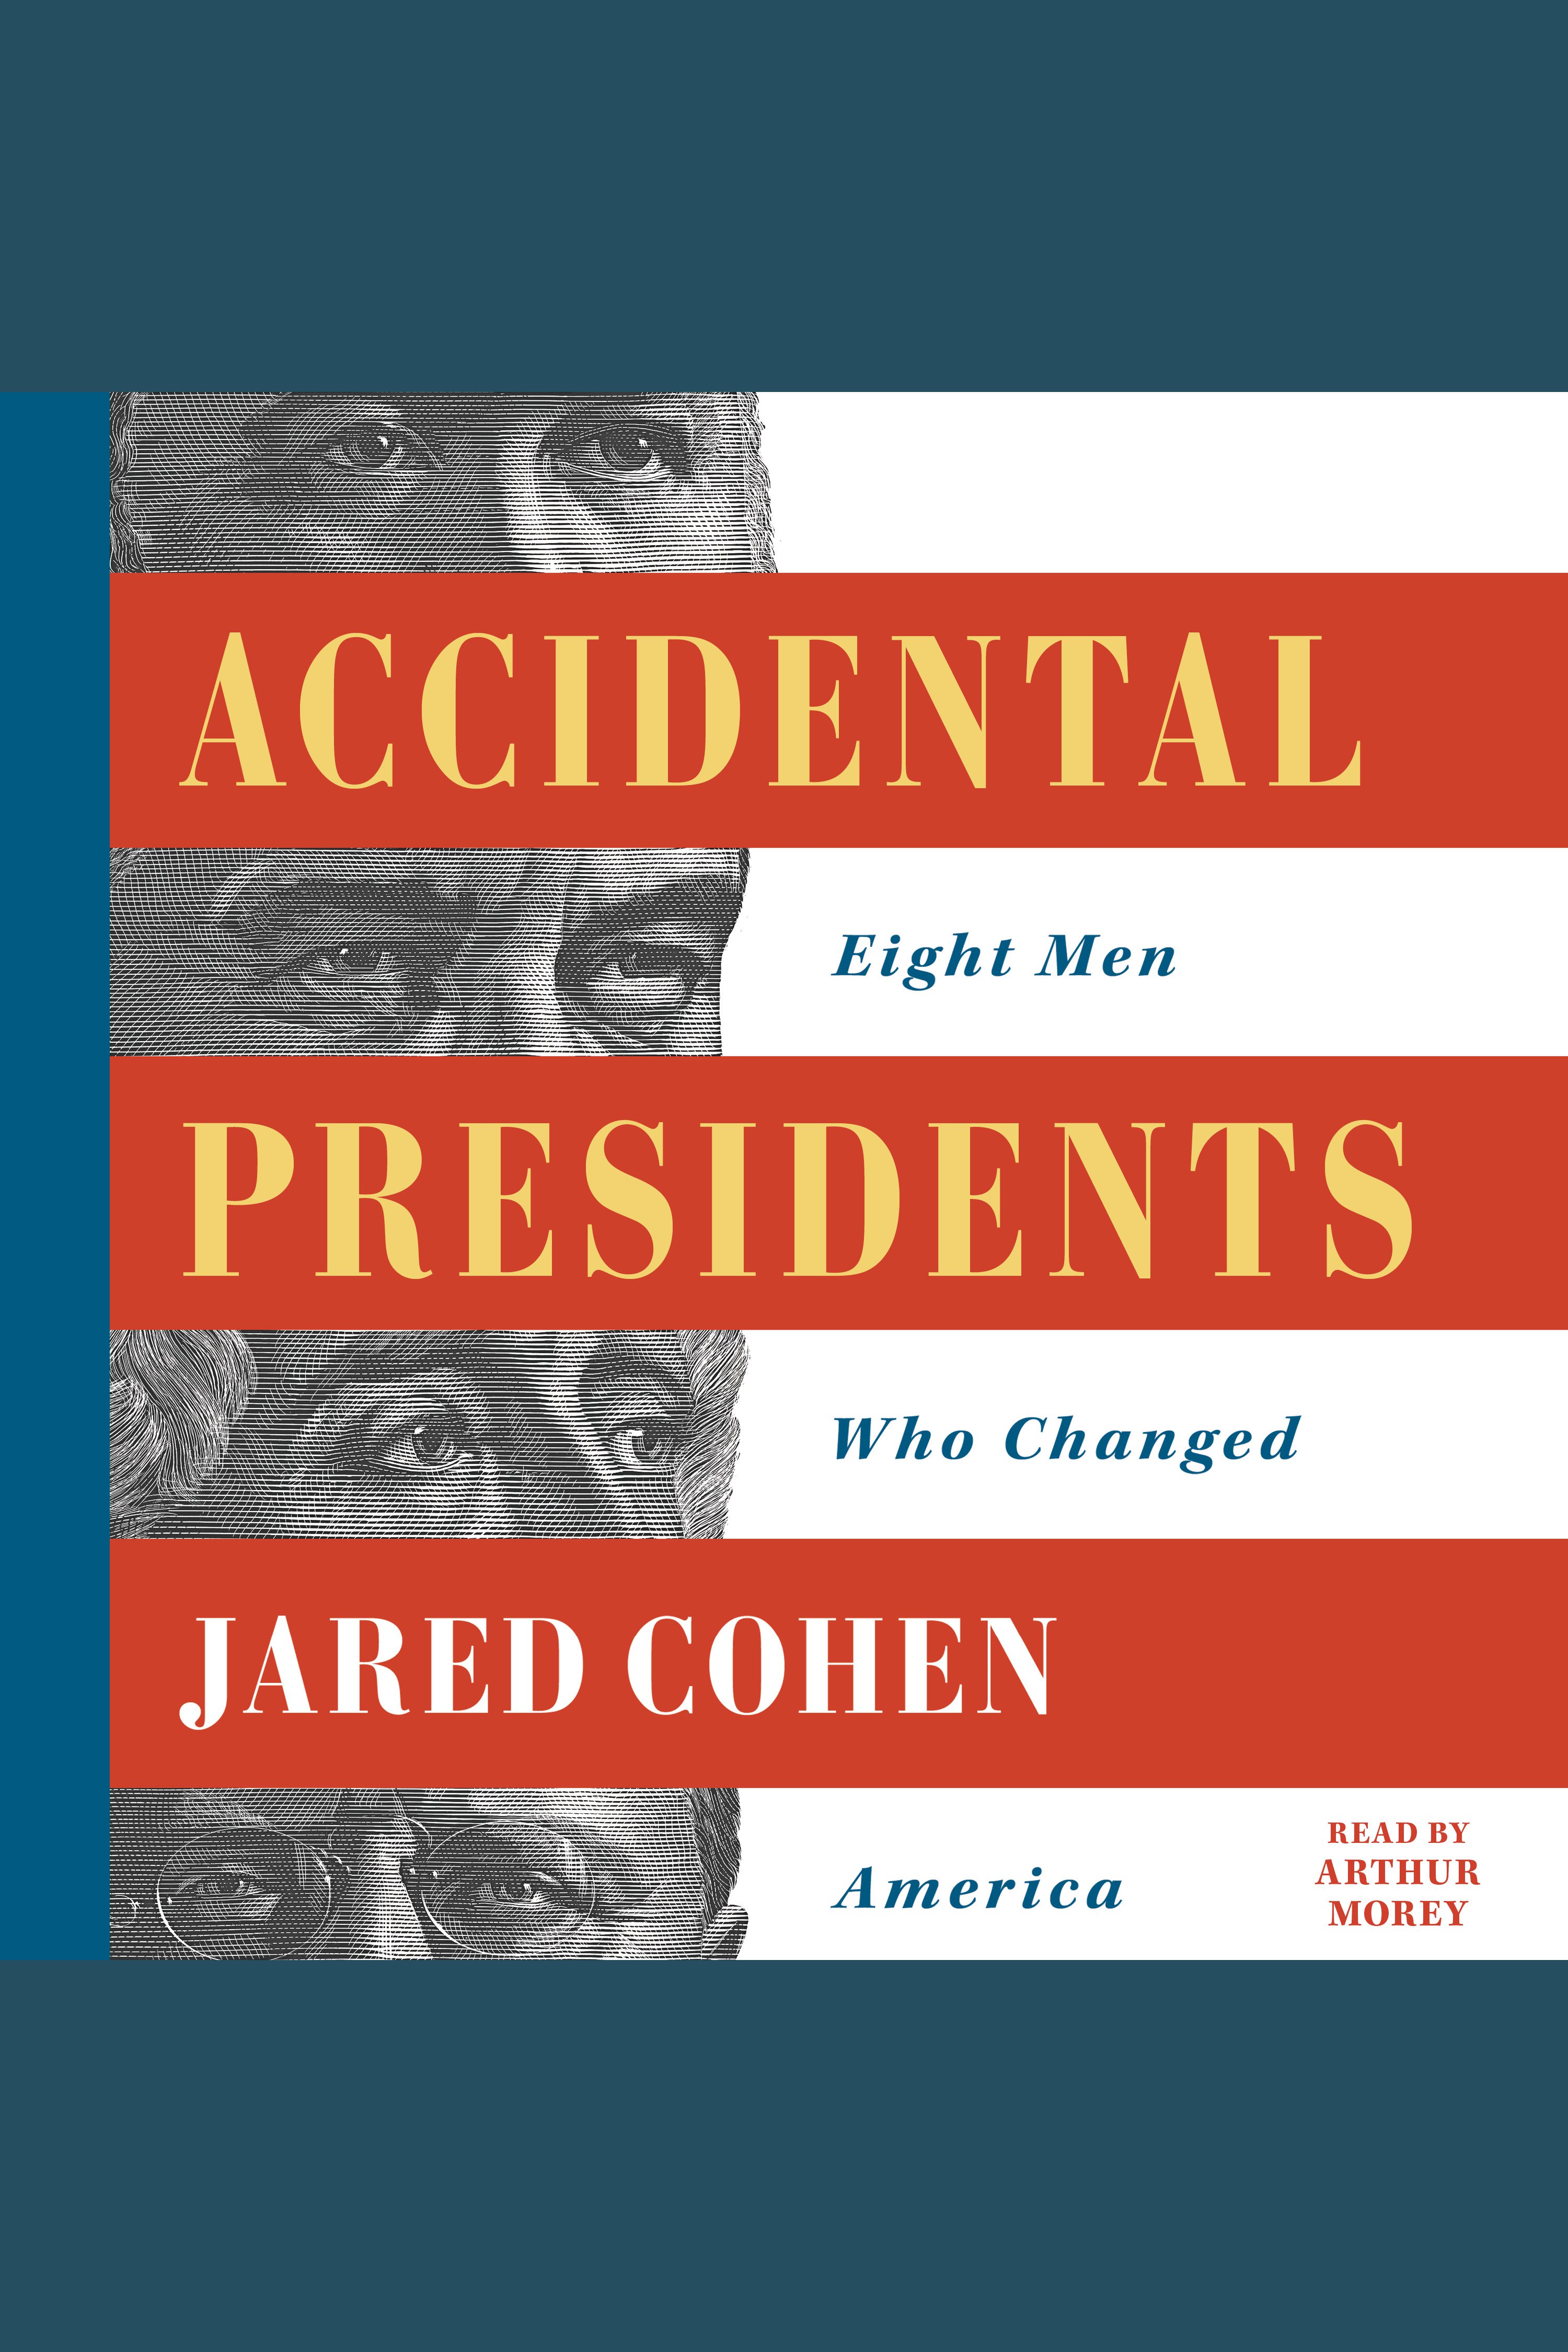 Image de couverture de Accidental Presidents [electronic resource] : Eight Men Who Changed America